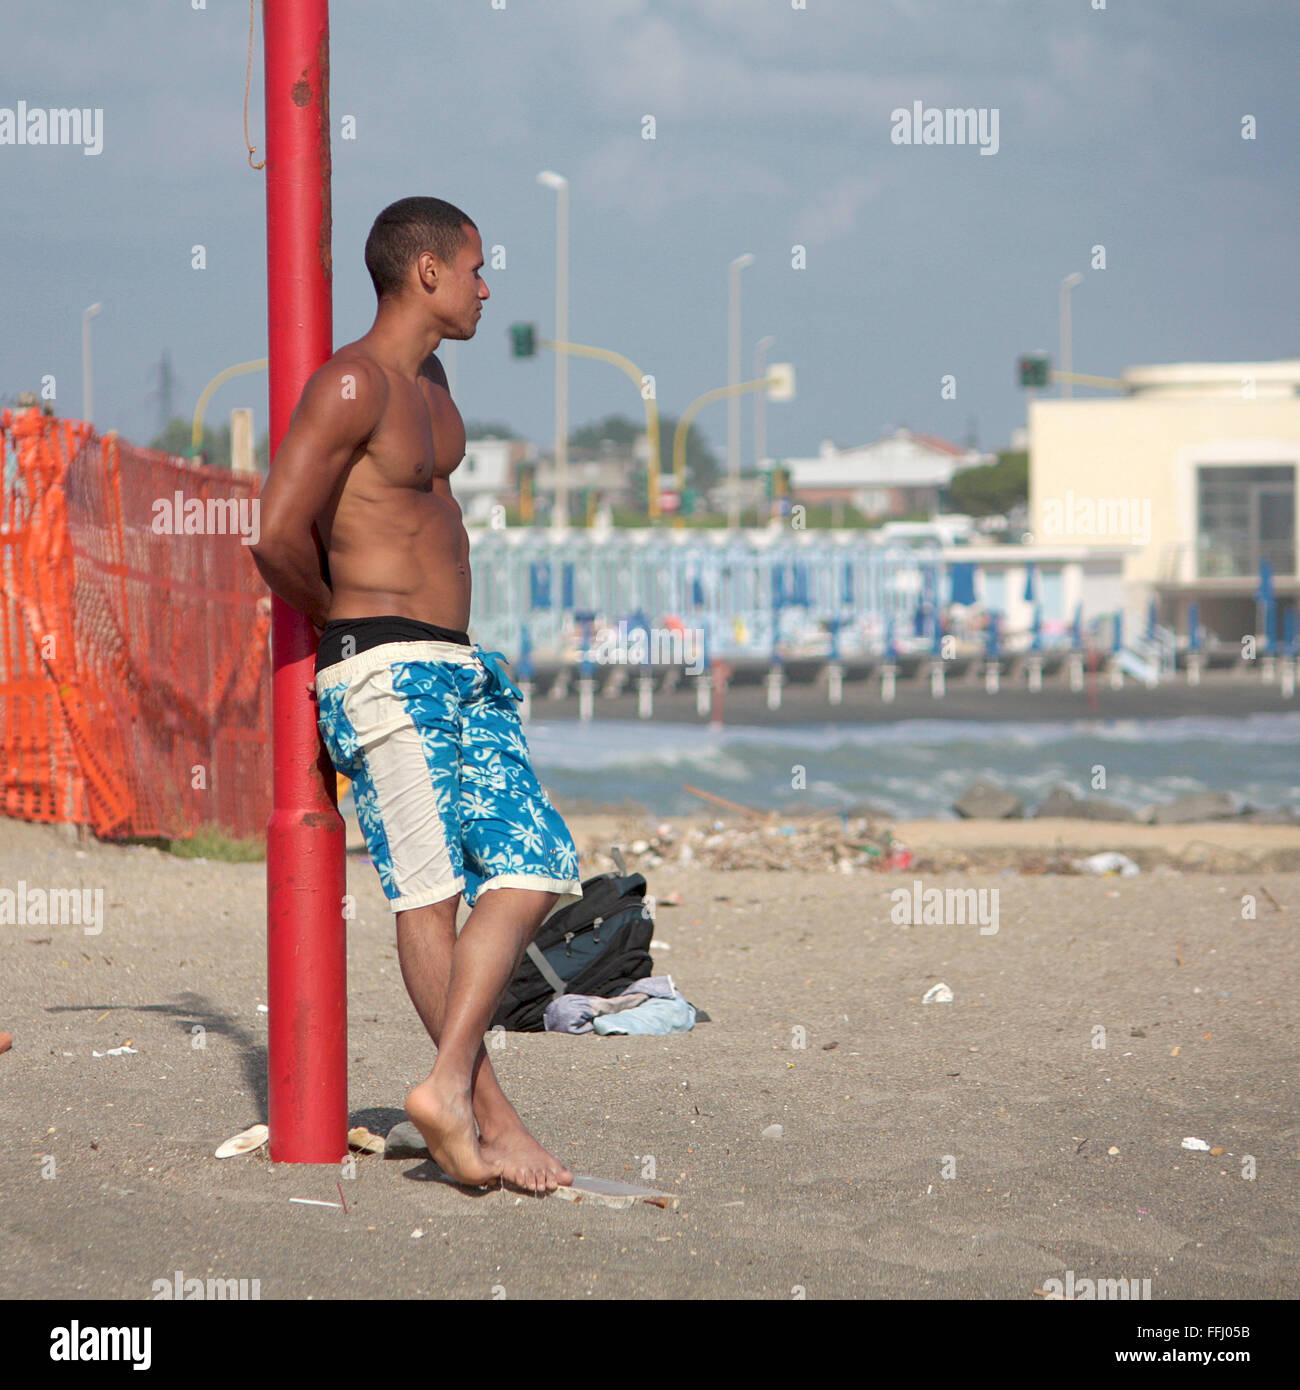 OSTIA, ITALY - JUNE 19, 2010: unidentified young man stands next to a pole in the beach of Ostia. Stock Photo